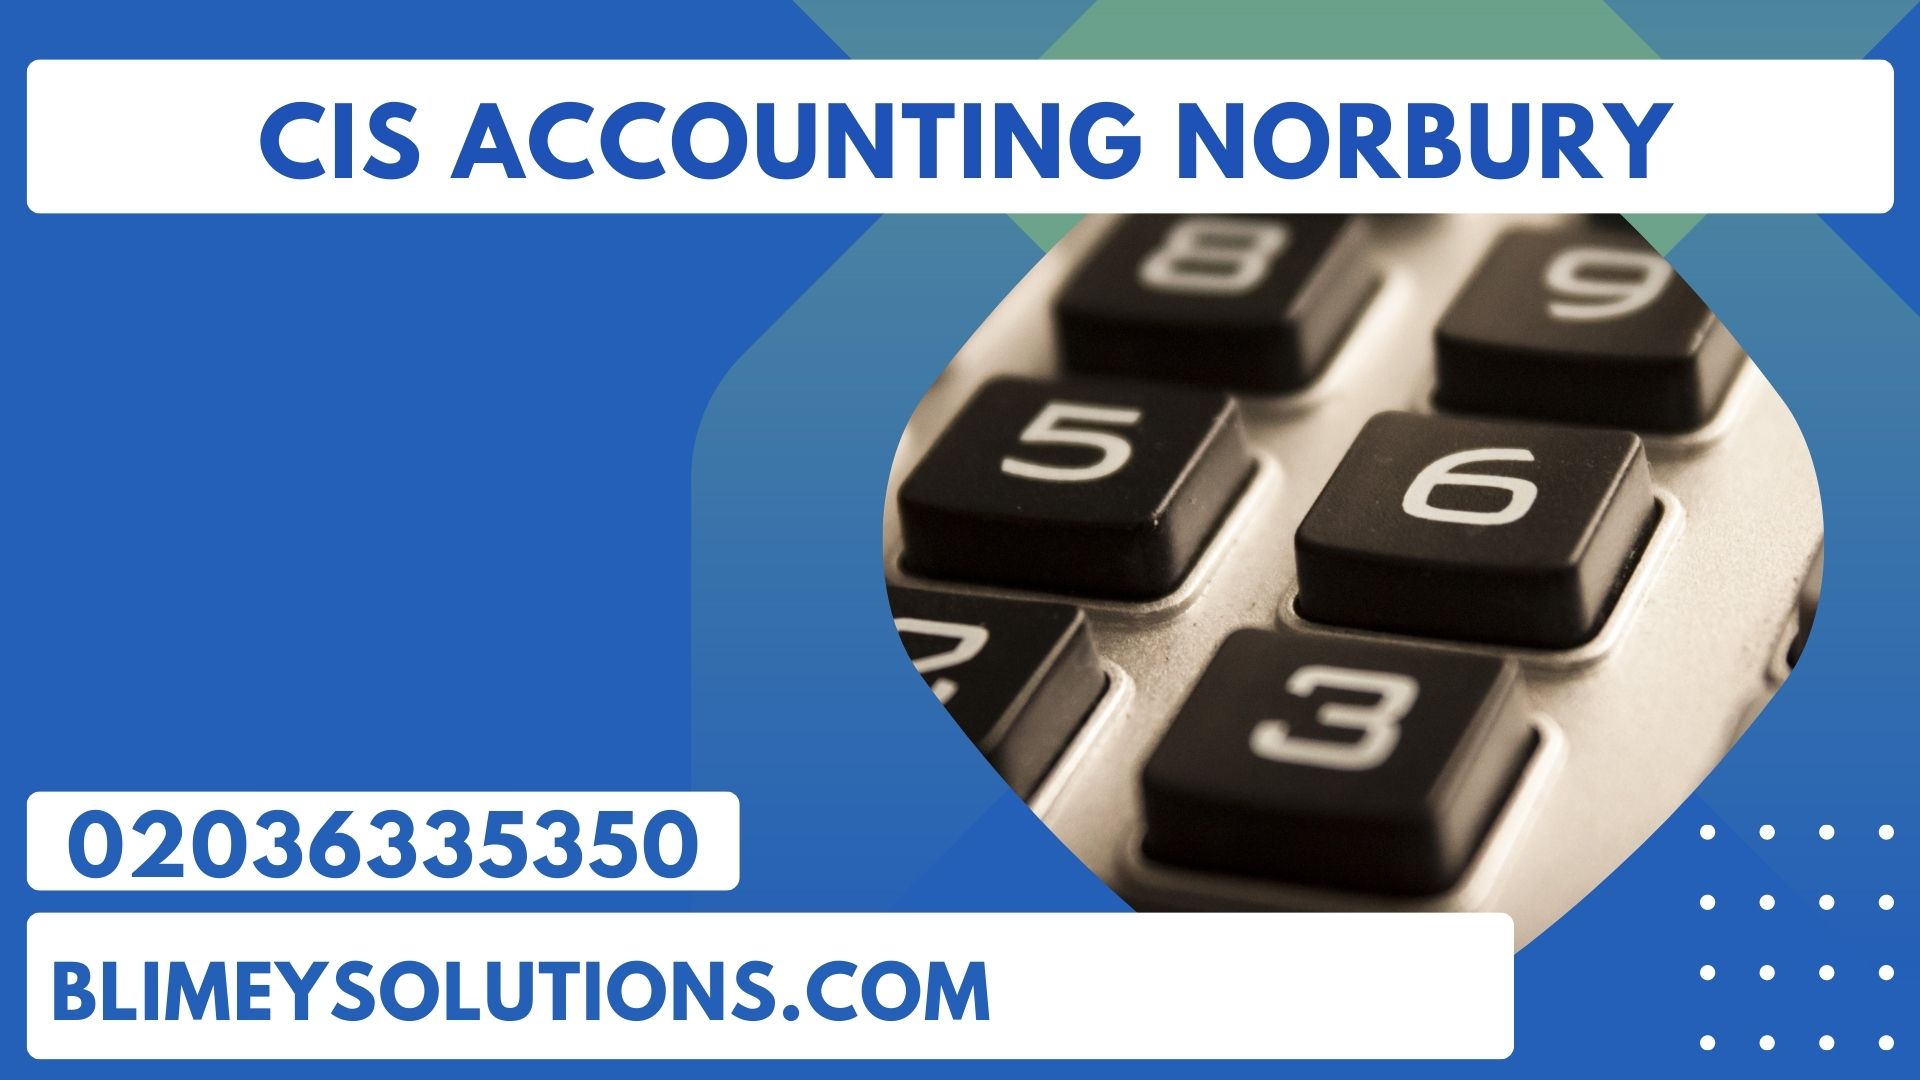 CIS Accounting in Norbury SW16 London